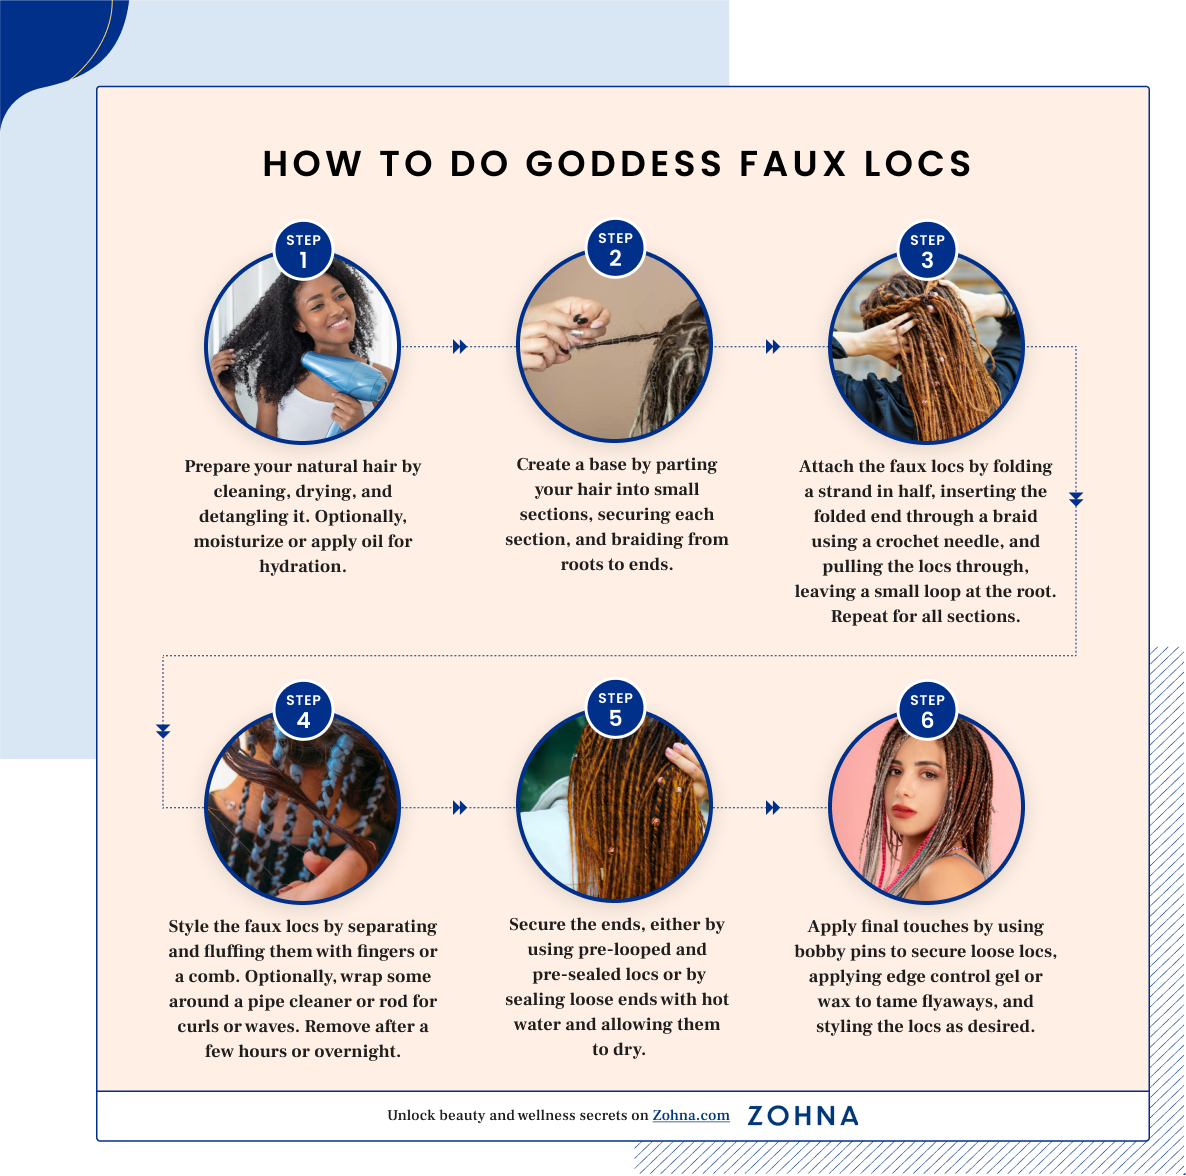 How To Do Goddess Faux Locs